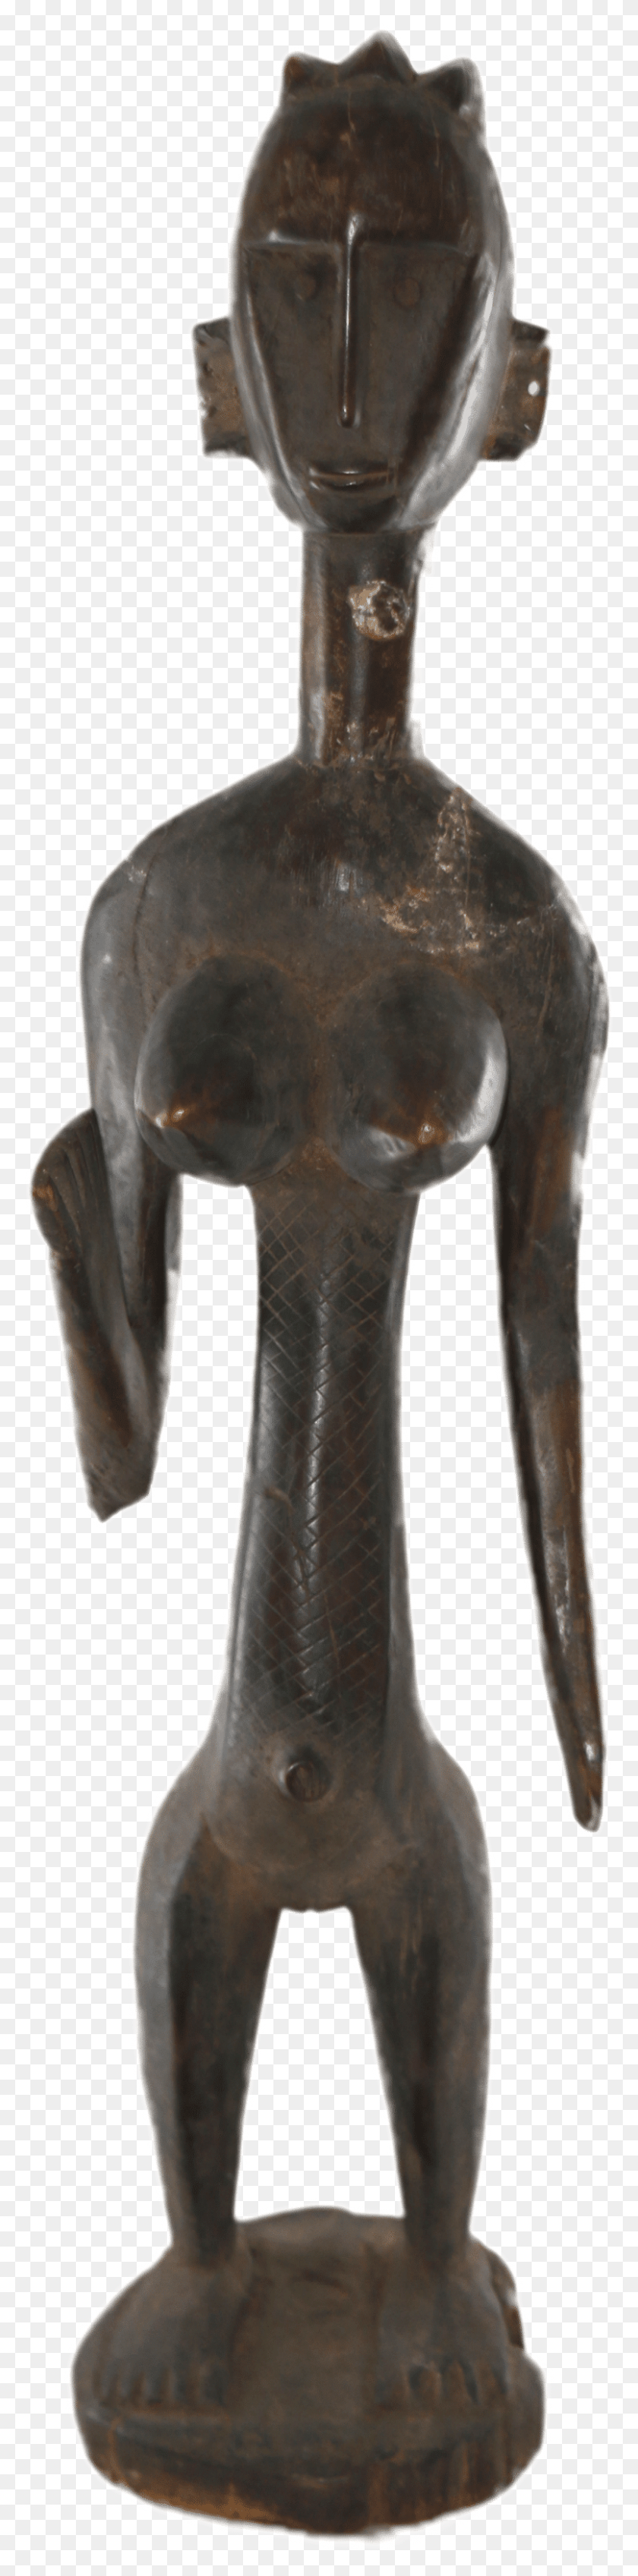 804x3437 African Arte054 Statue, Building, Architecture, Spoon HD PNG Download